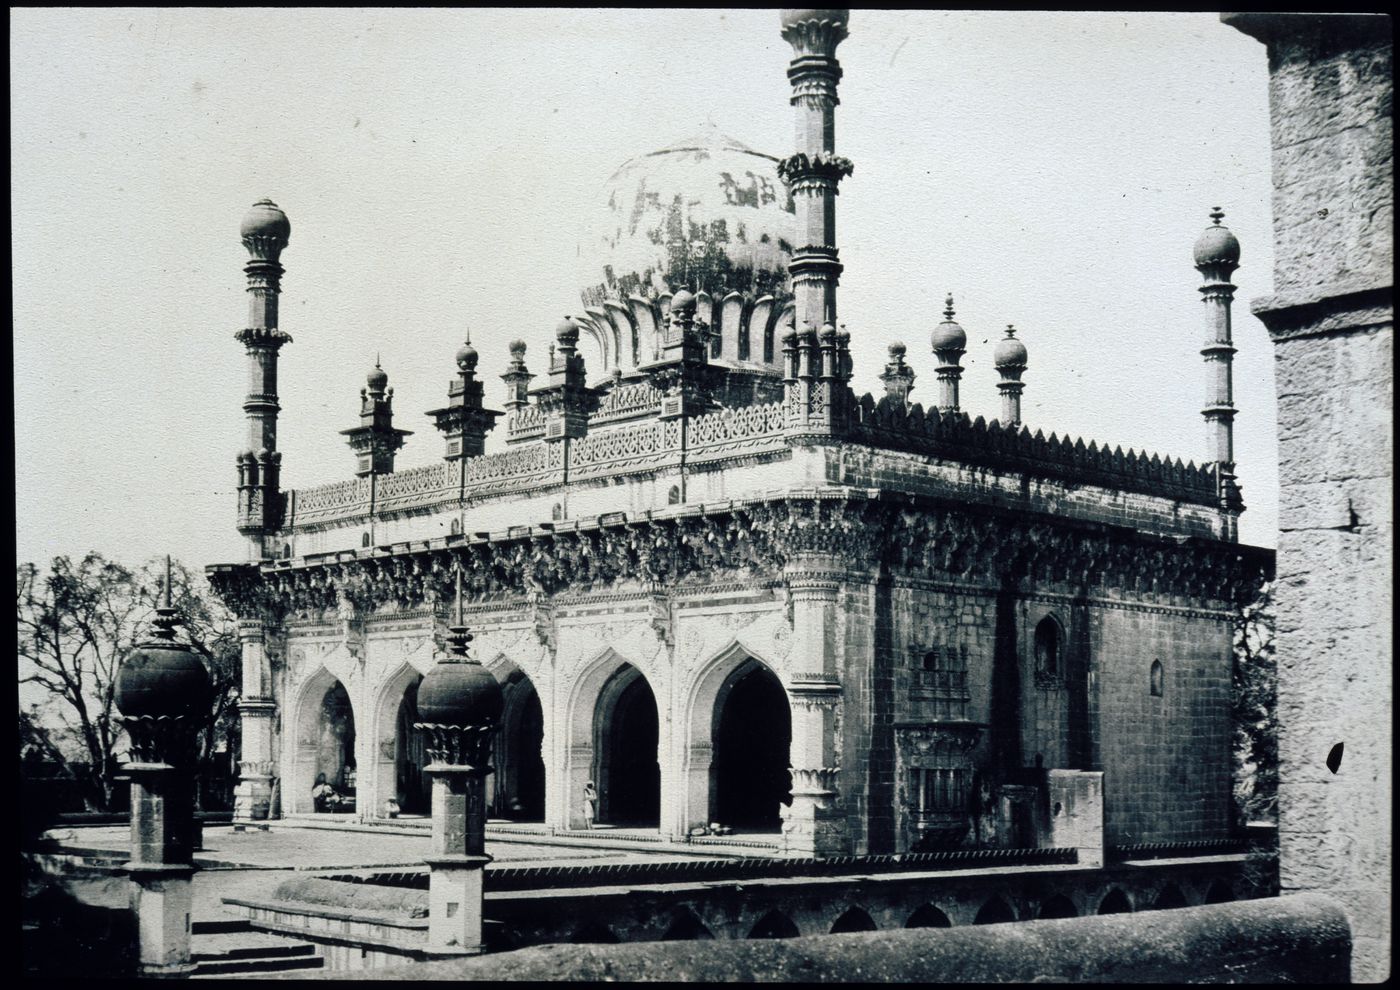 View of the mosque of the Ibrahim Rauza complex from the gateway, Beejapore (now Bijapur), India